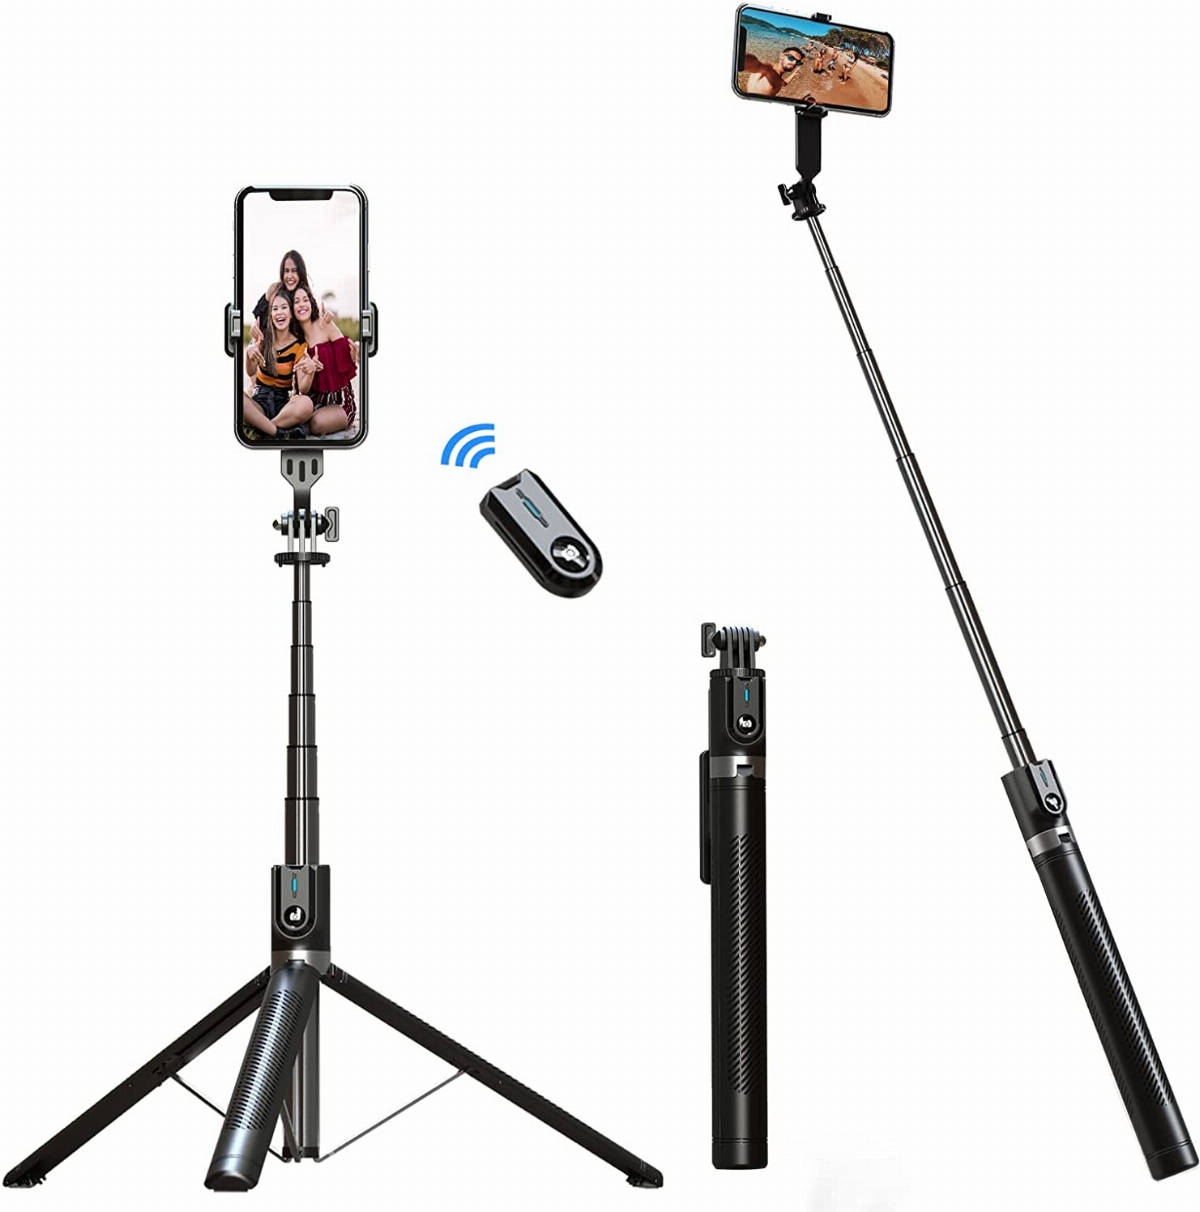 Blue Vlogging ATUMTEK 51 Selfie Stick Tripod Video Recording All in One Extendable Phone Tripod Stand with Bluetooth Remote 360° Rotation for iPhone and Android Phone Selfies Live Streaming 